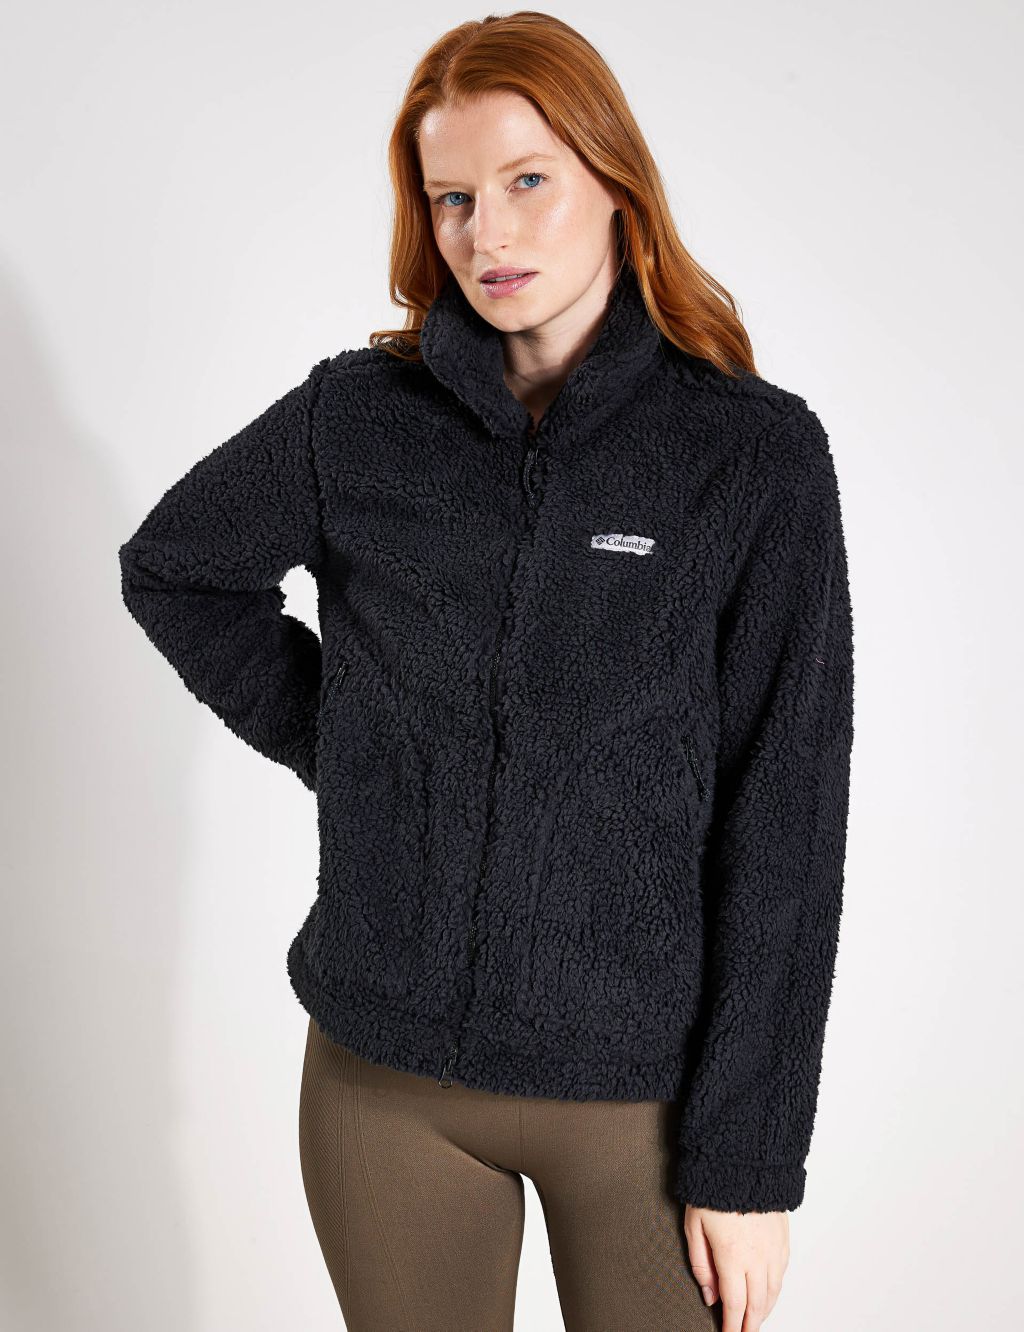 Winter Pass Funnel Neck Jacket image 1